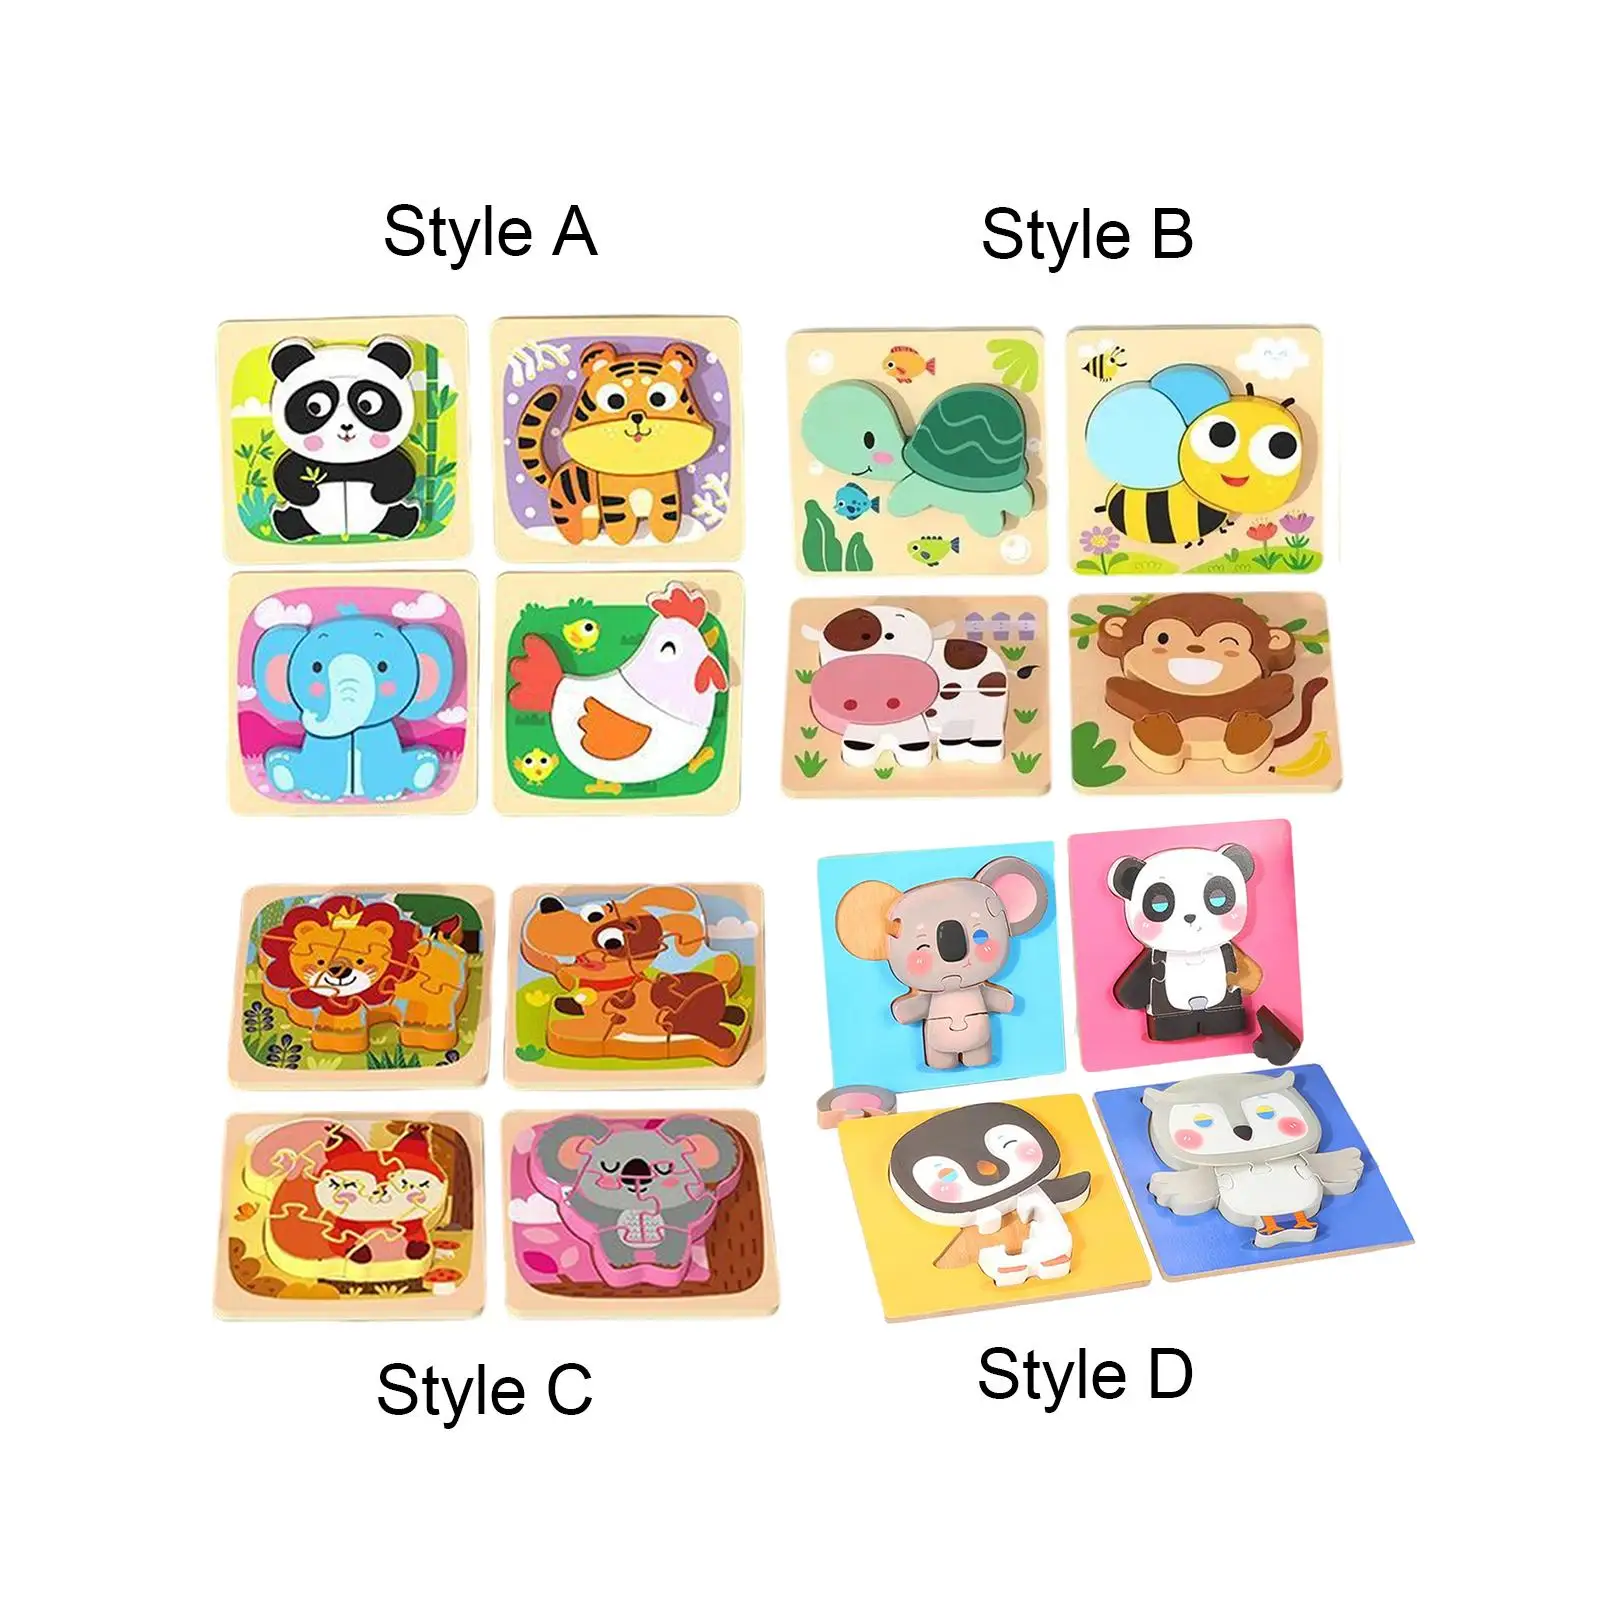 4x Wooden Animal Puzzles with 4 Animal Models Developmental Toy Wooden Crafts Animal Shaped Puzzles for Birthday Gifts